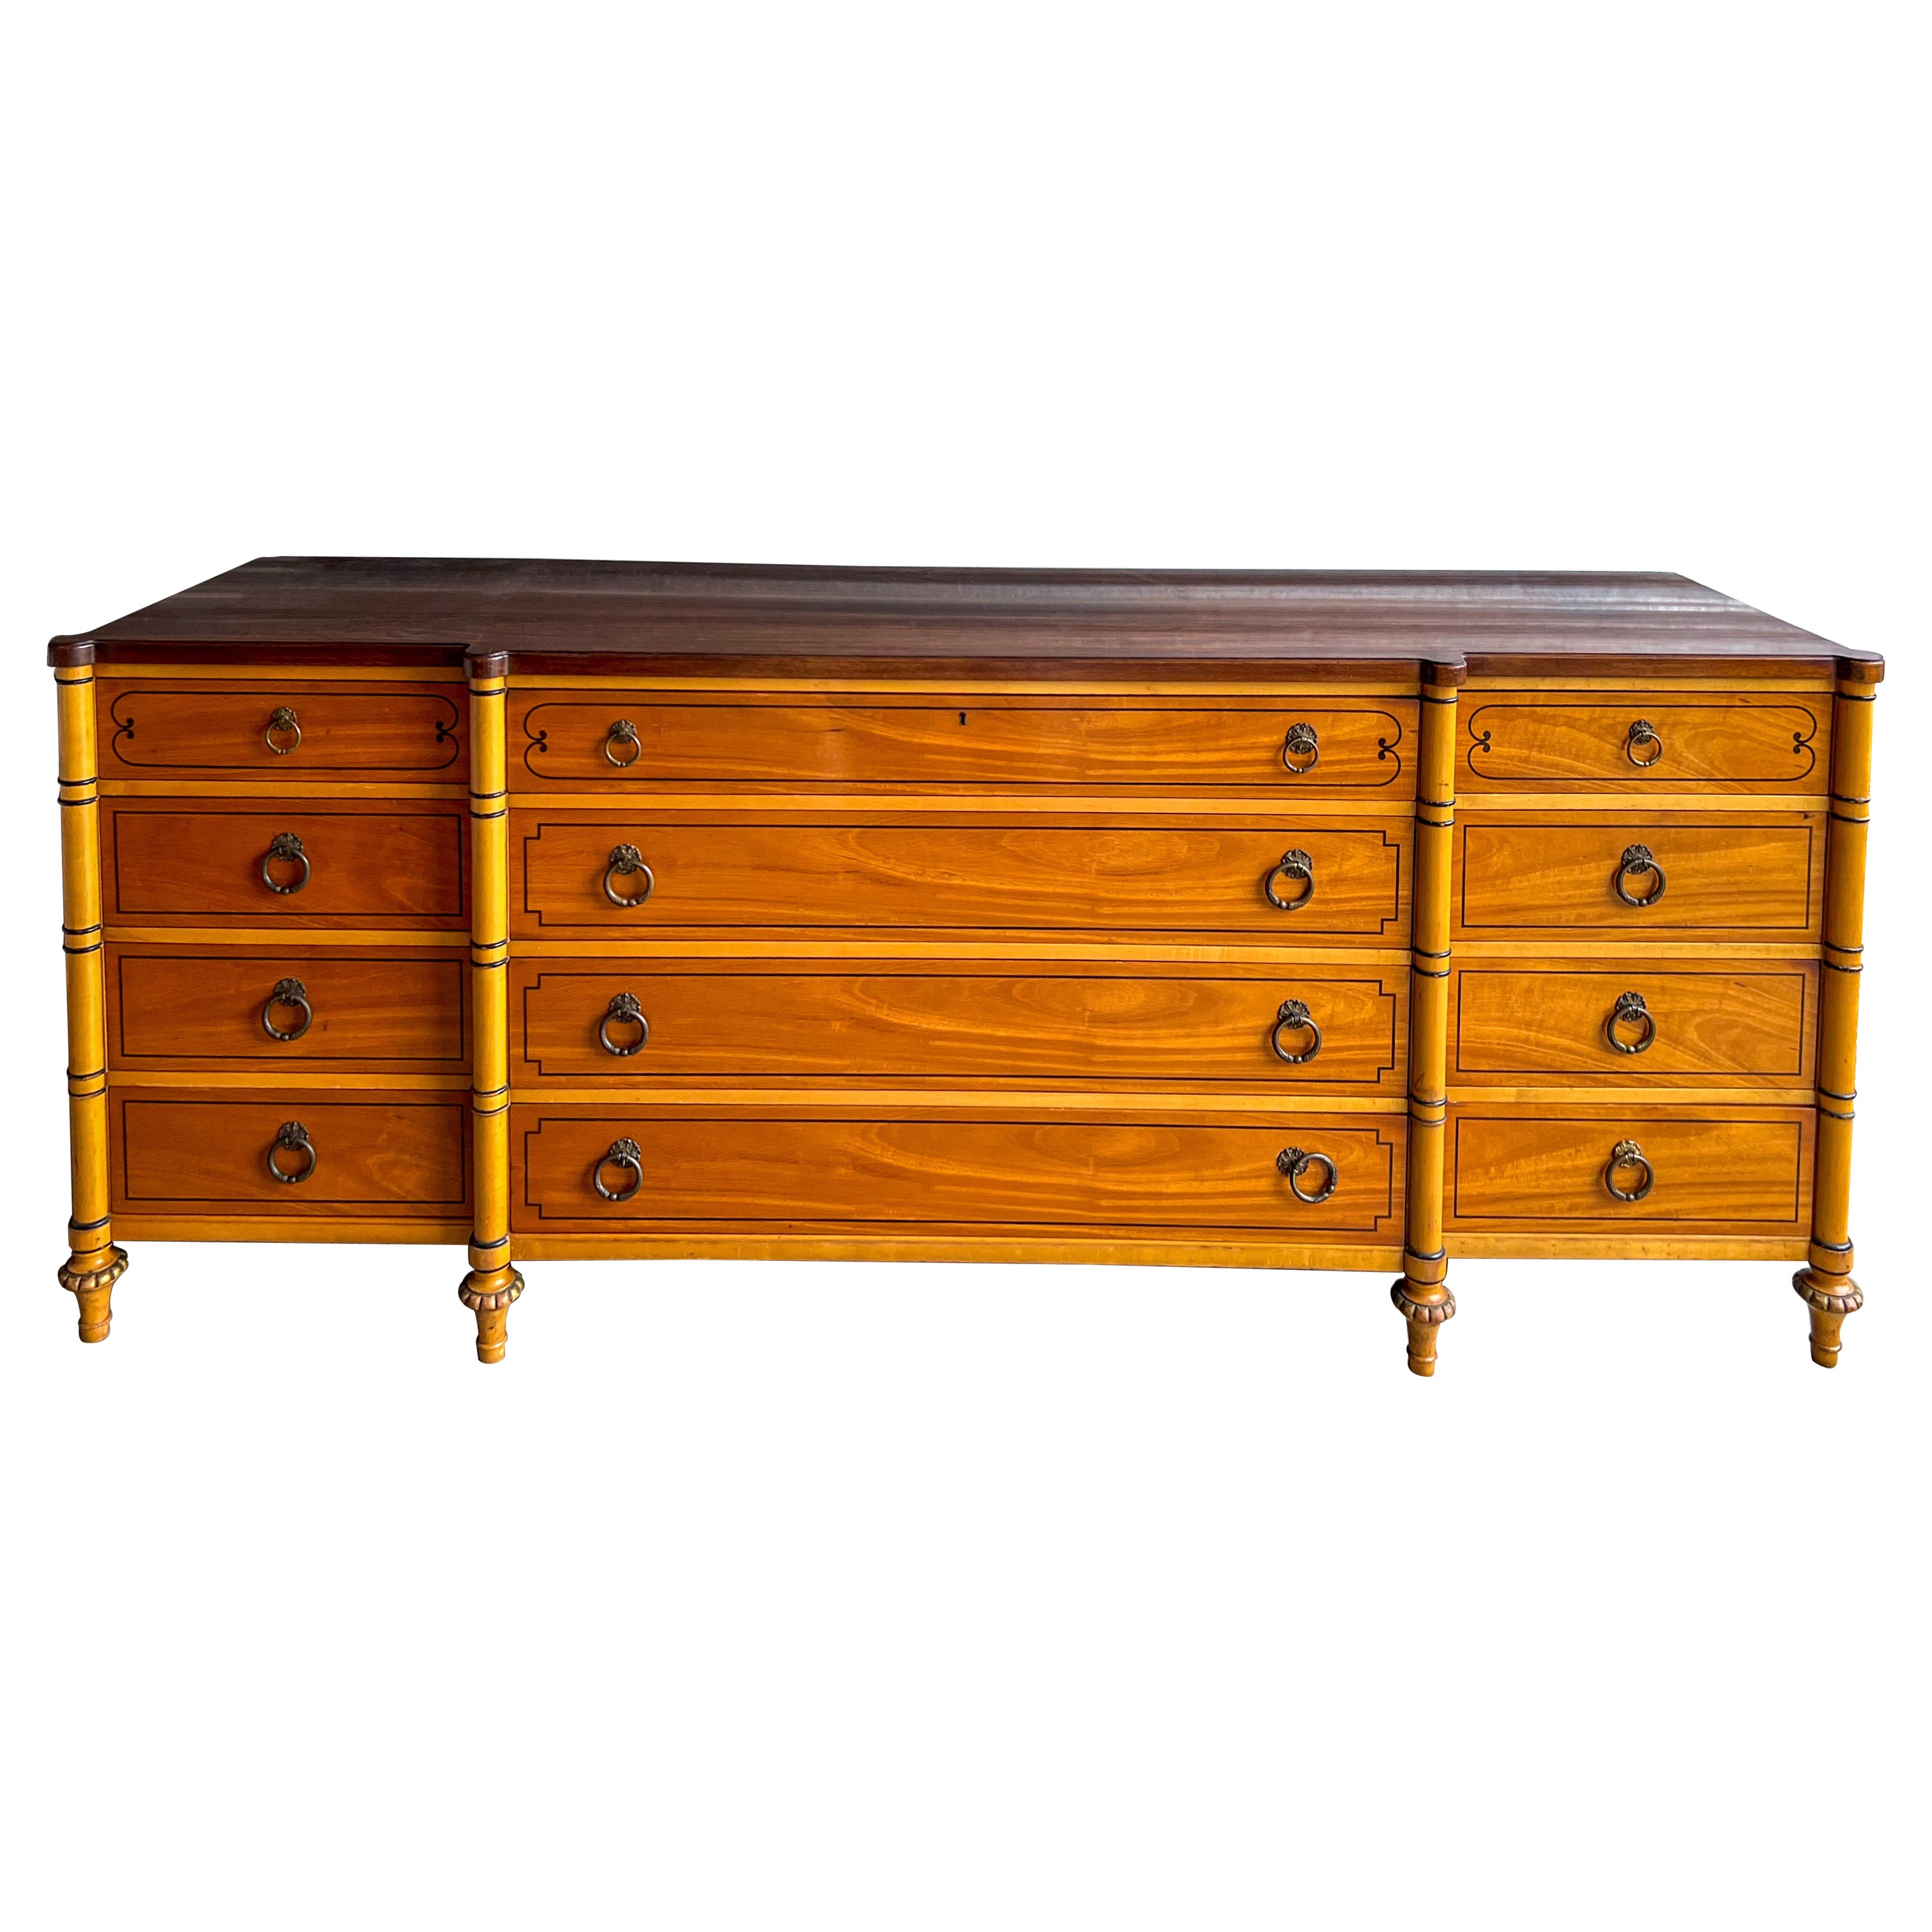 1940s French Regency Style Faux Bamboo Inspired Maple Chest of Drawers